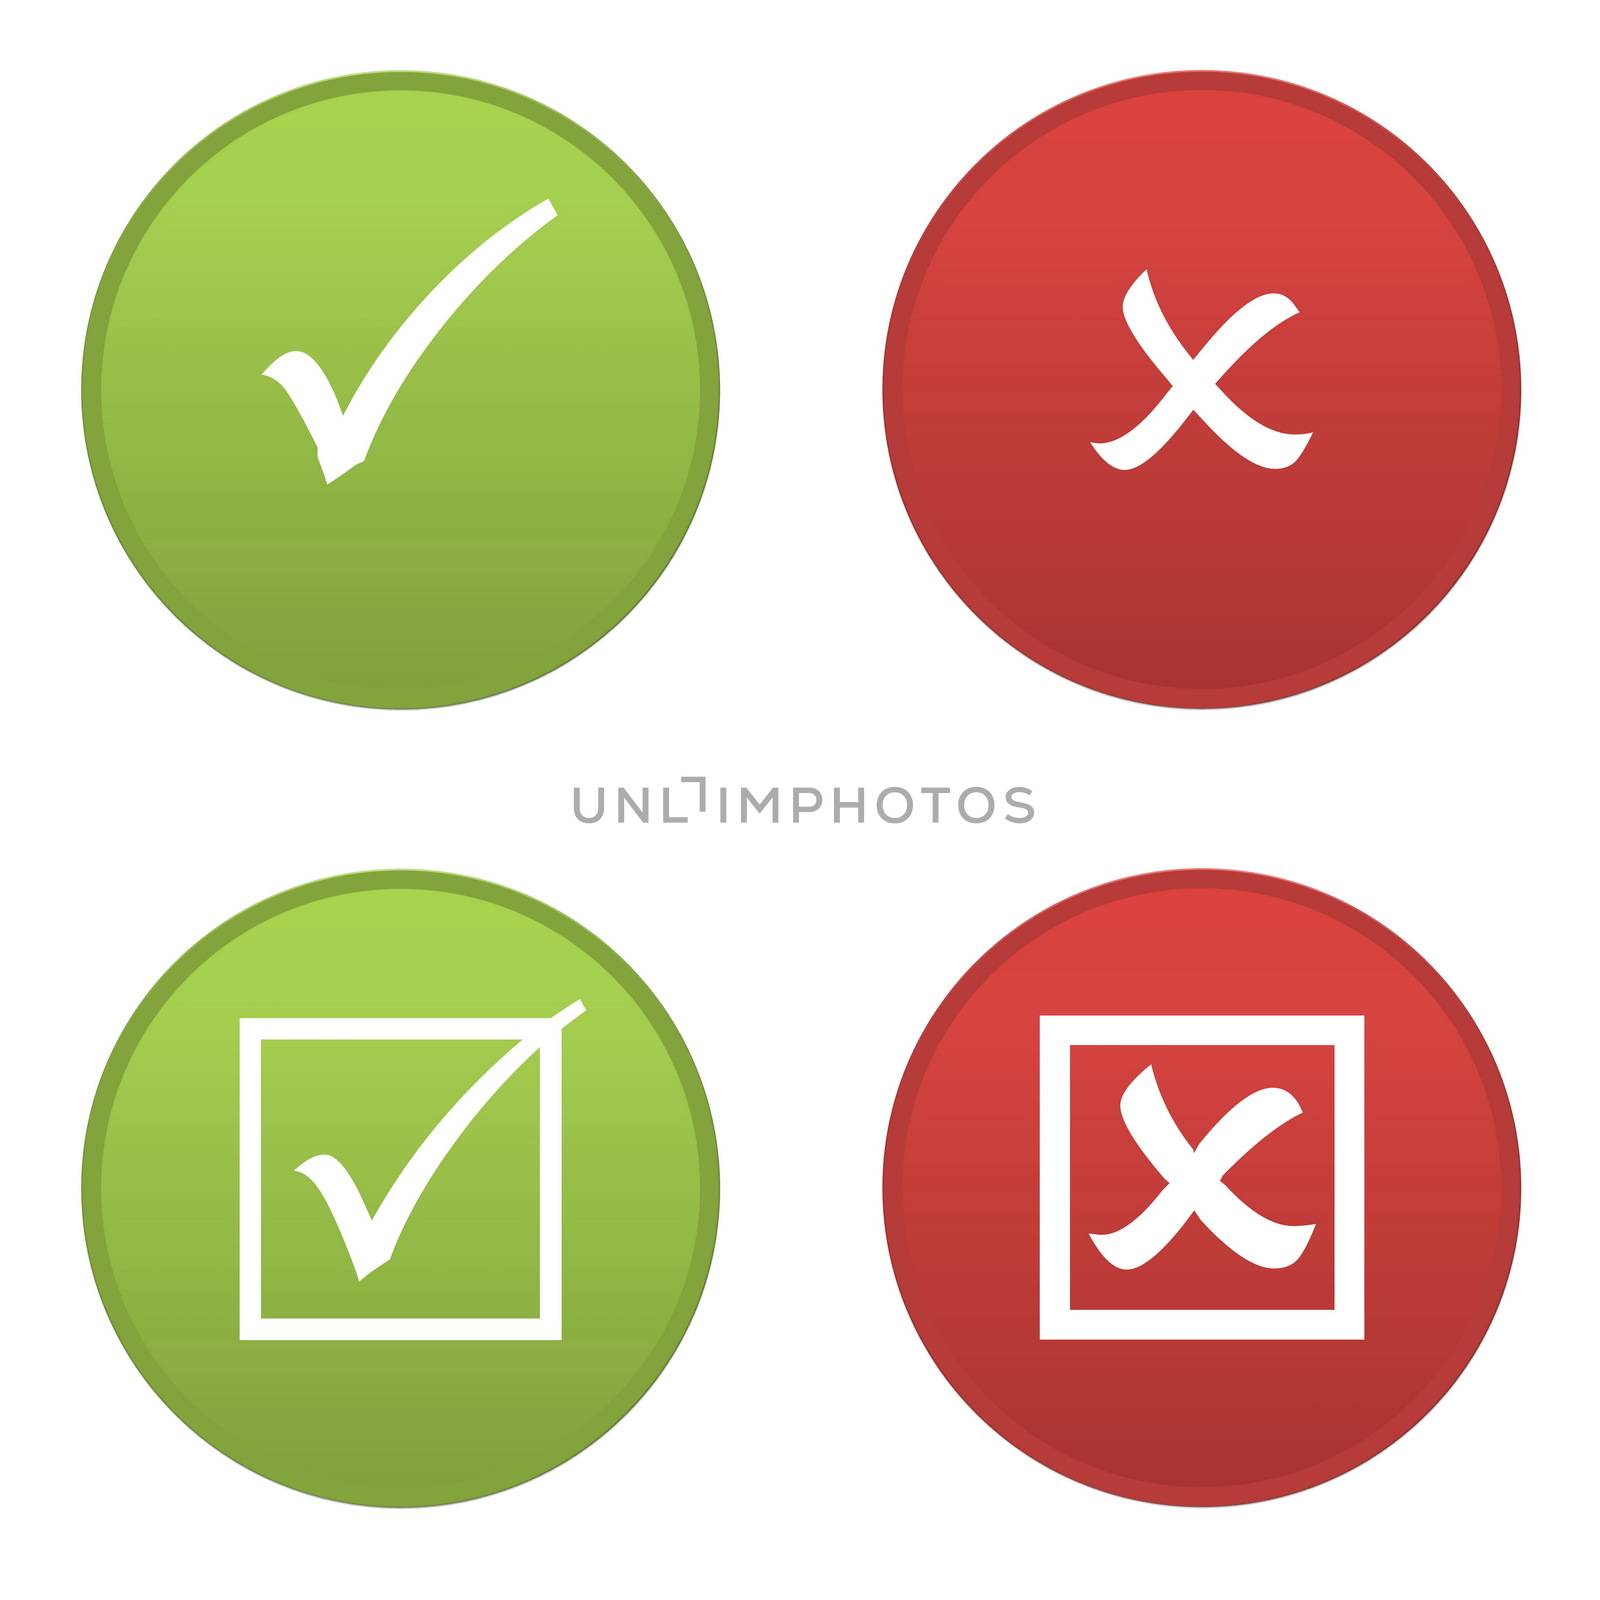 Set of right and wrong symbols icons isolated in white background